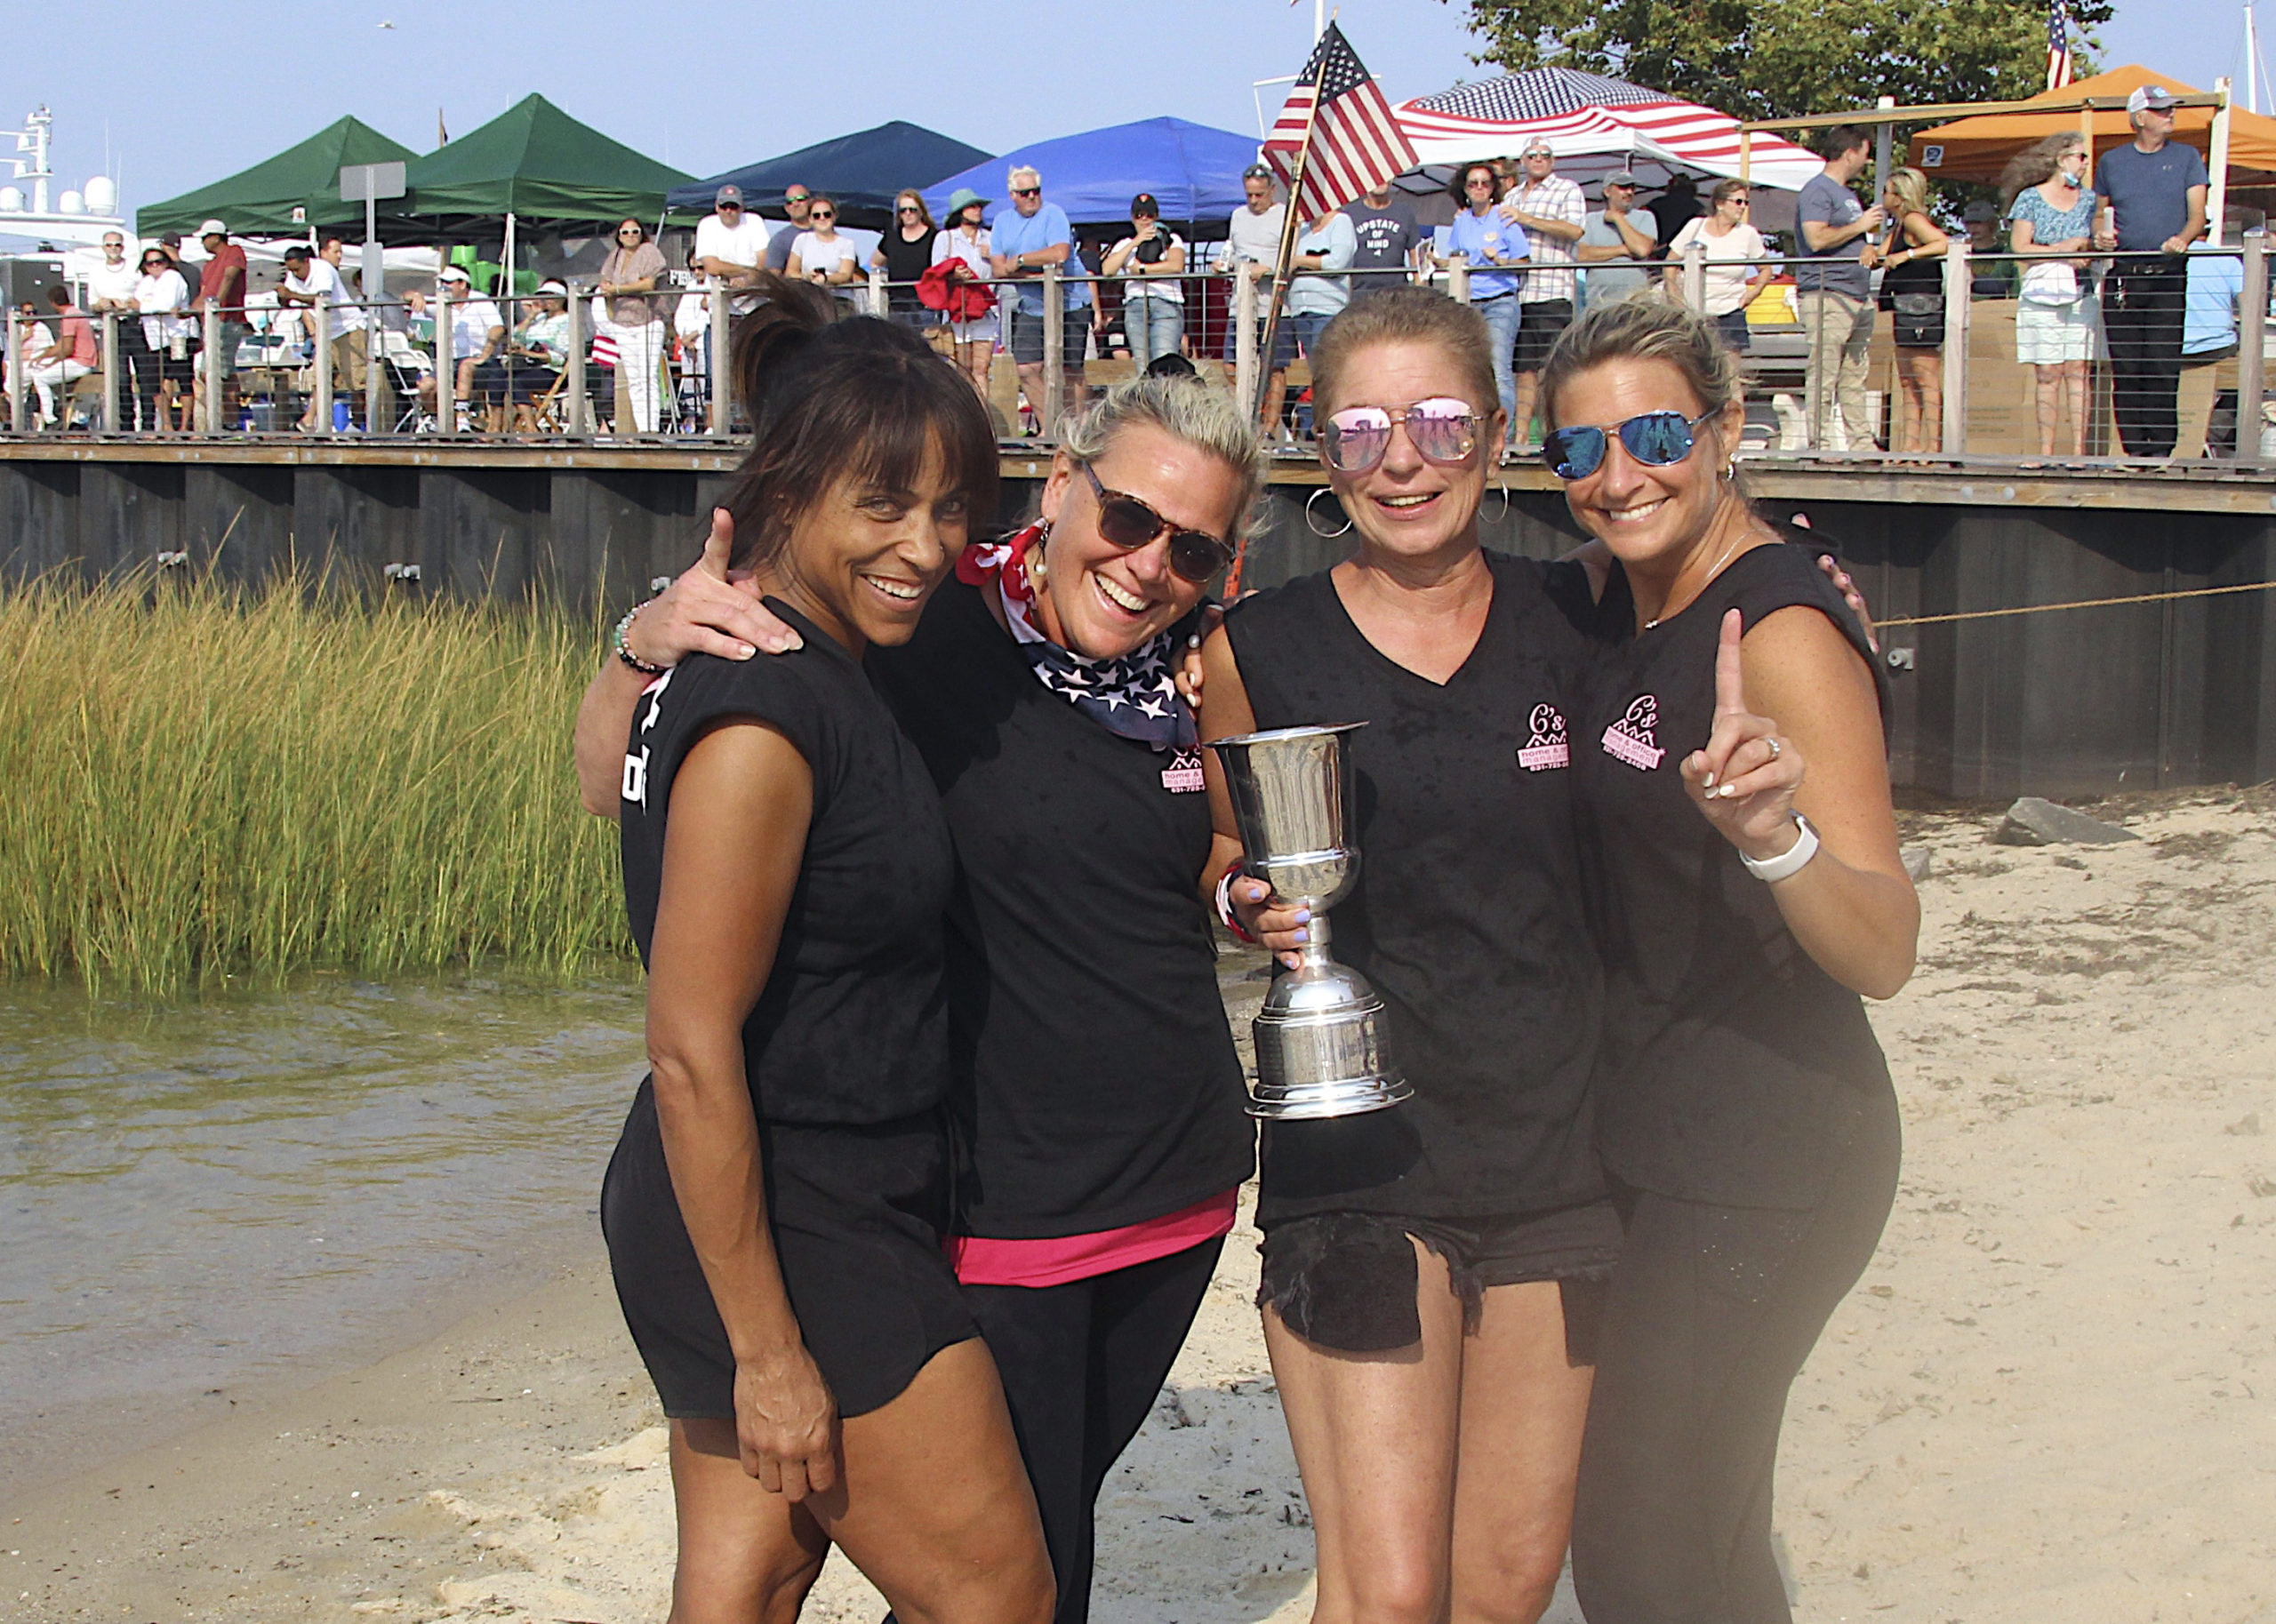 The champion women’s whaleboat team from C’s Home & Office Management included from left to right, Pam Miller, Becky Guyer, Marianne Ward and Tara Fordham.   KYRIL BROMLEY